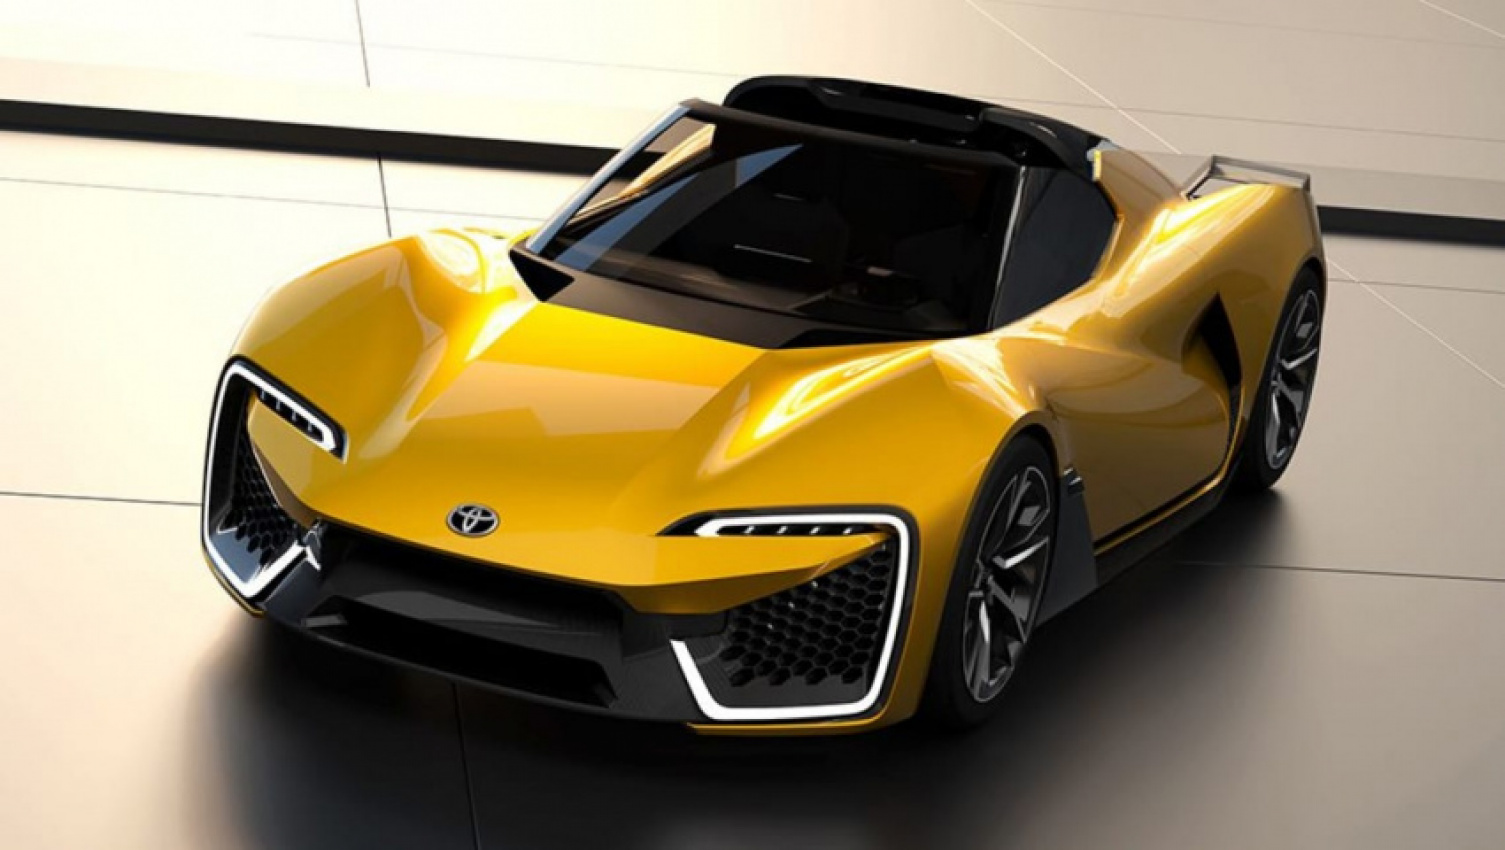 autos, cars, lotus, maserati, porsche, toyota, alpine coupe range, alpine news, electric, electric cars, green cars, industry news, lotus coupe range, lotus news, showroom news, sports cars, suzuki coupe range, suzuki news, toyota coupe range, toyota mr2, toyota news, toyota's reborn mr2: what we know about new all-electric porsche, lotus, maserati and alpine rival